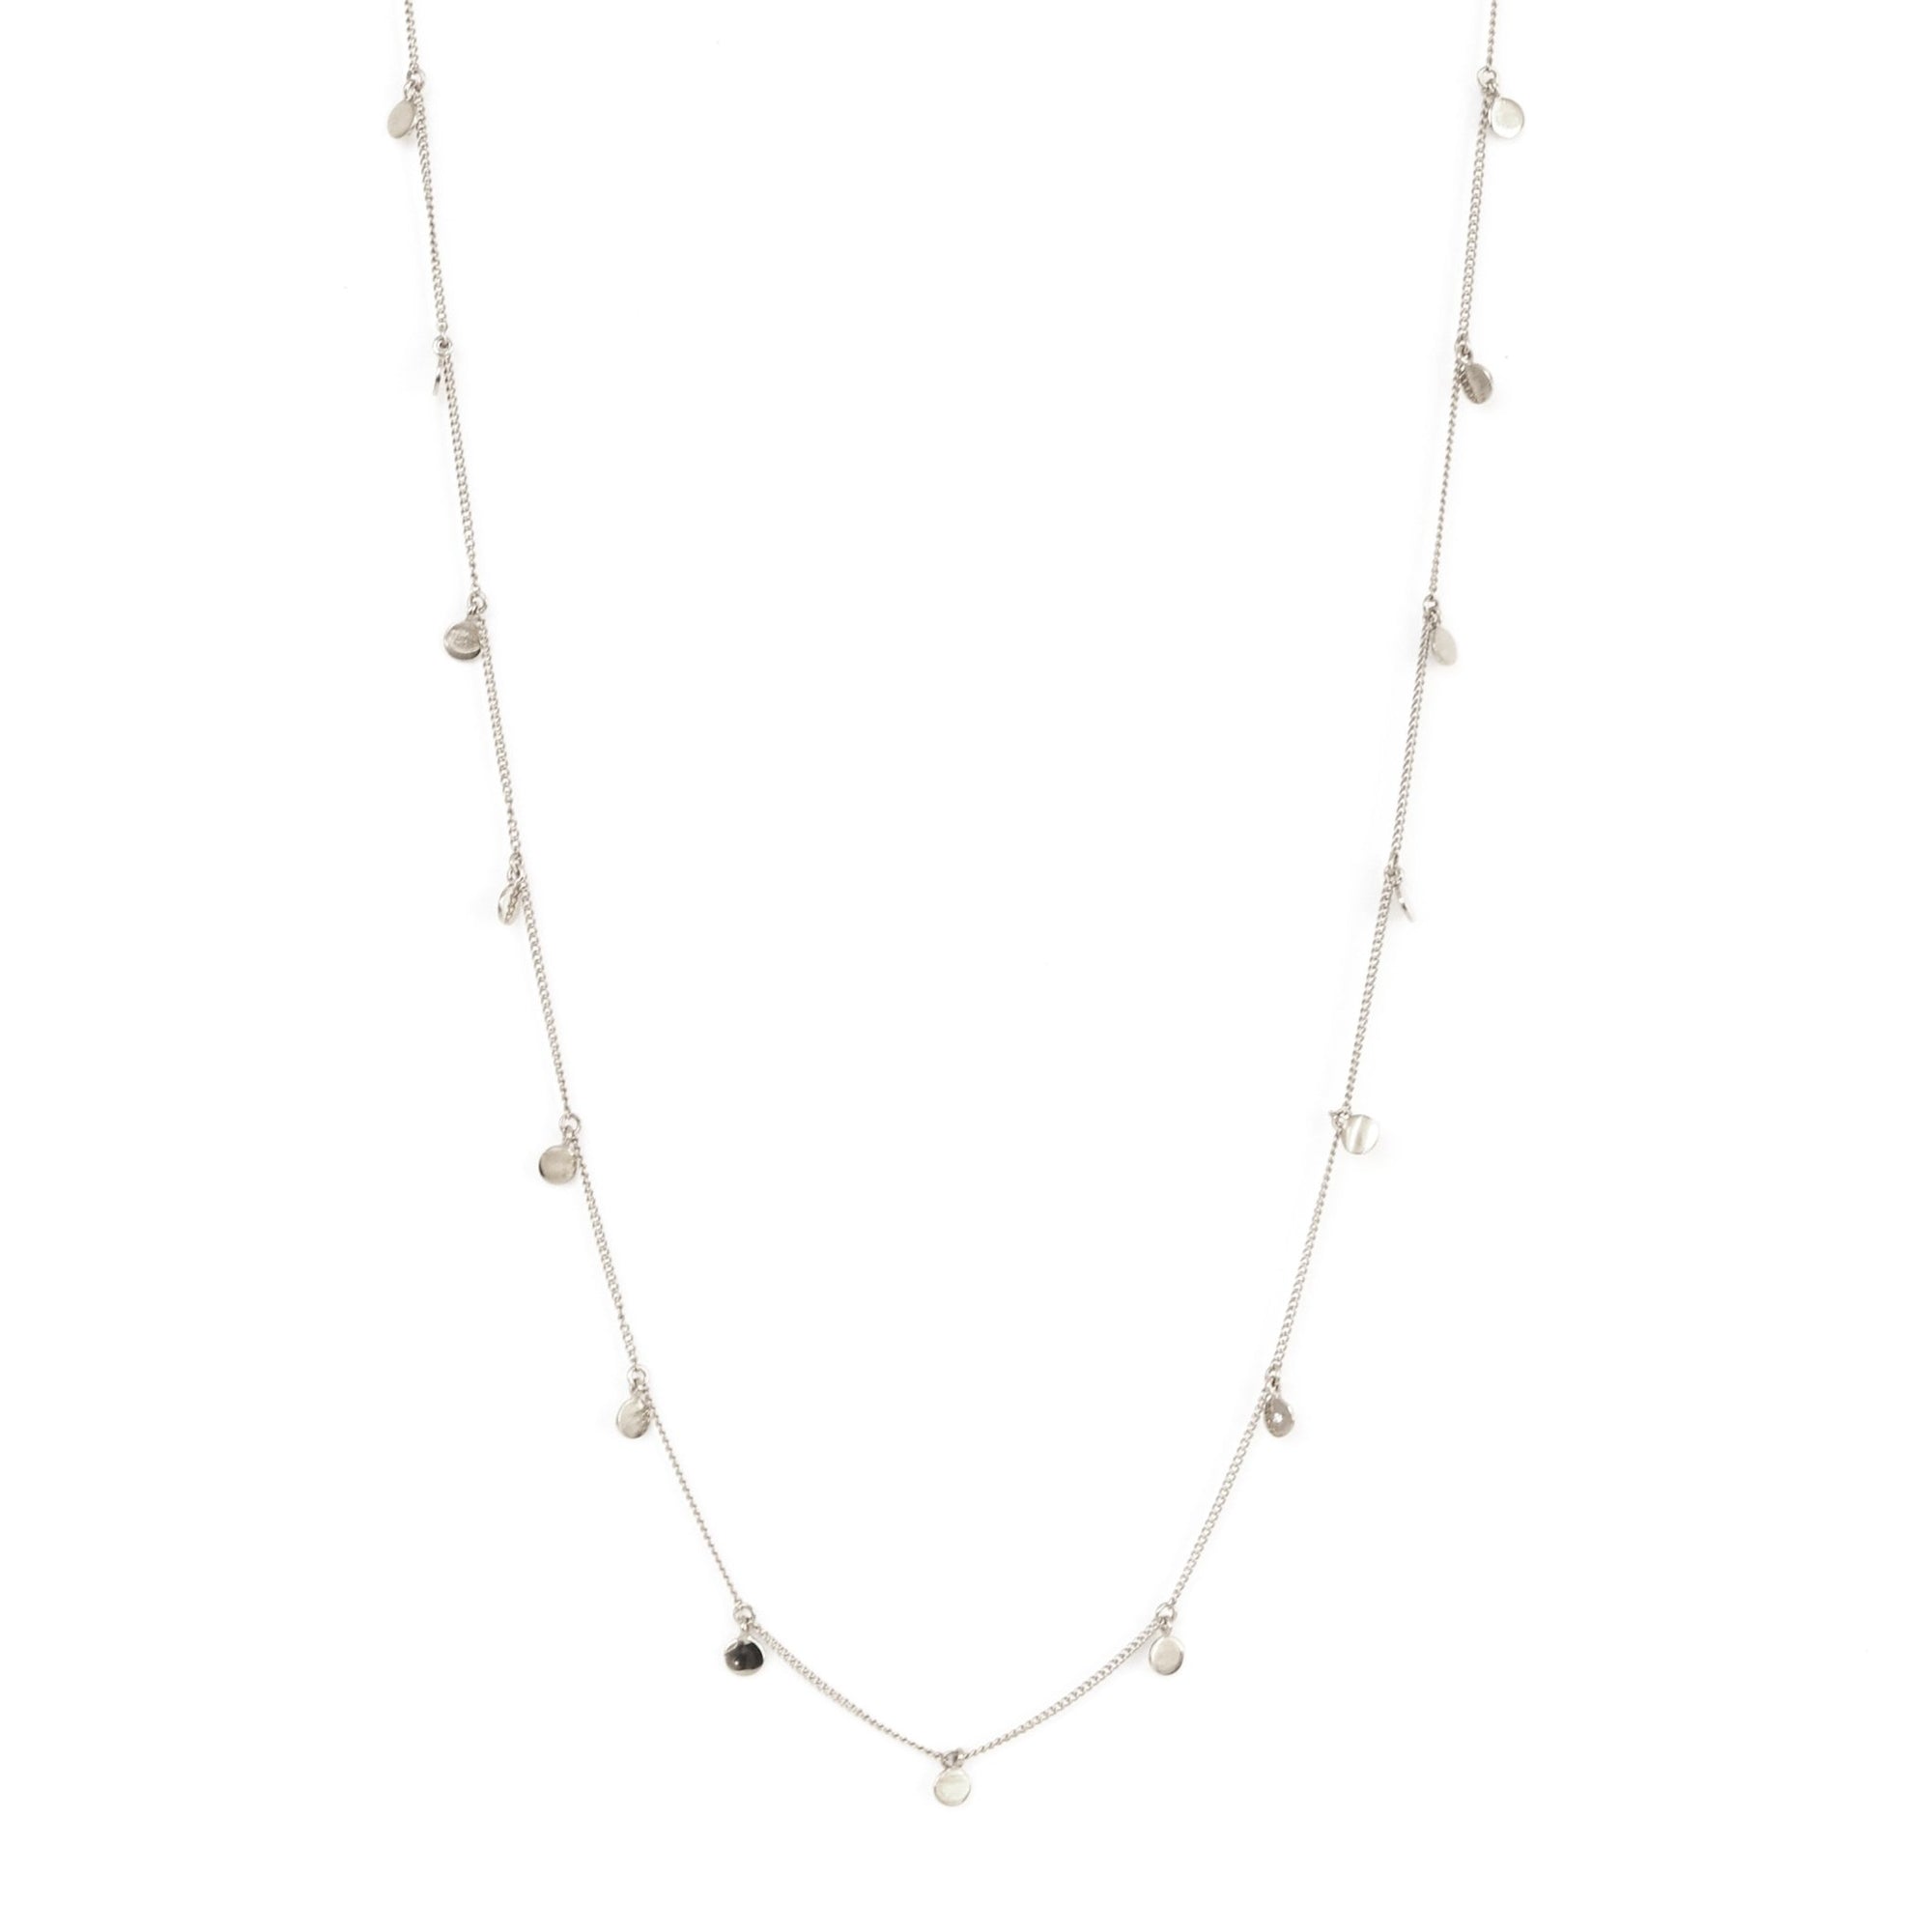 POISE LONG DISK NECKLACE - SILVER - SO PRETTY CARA COTTER